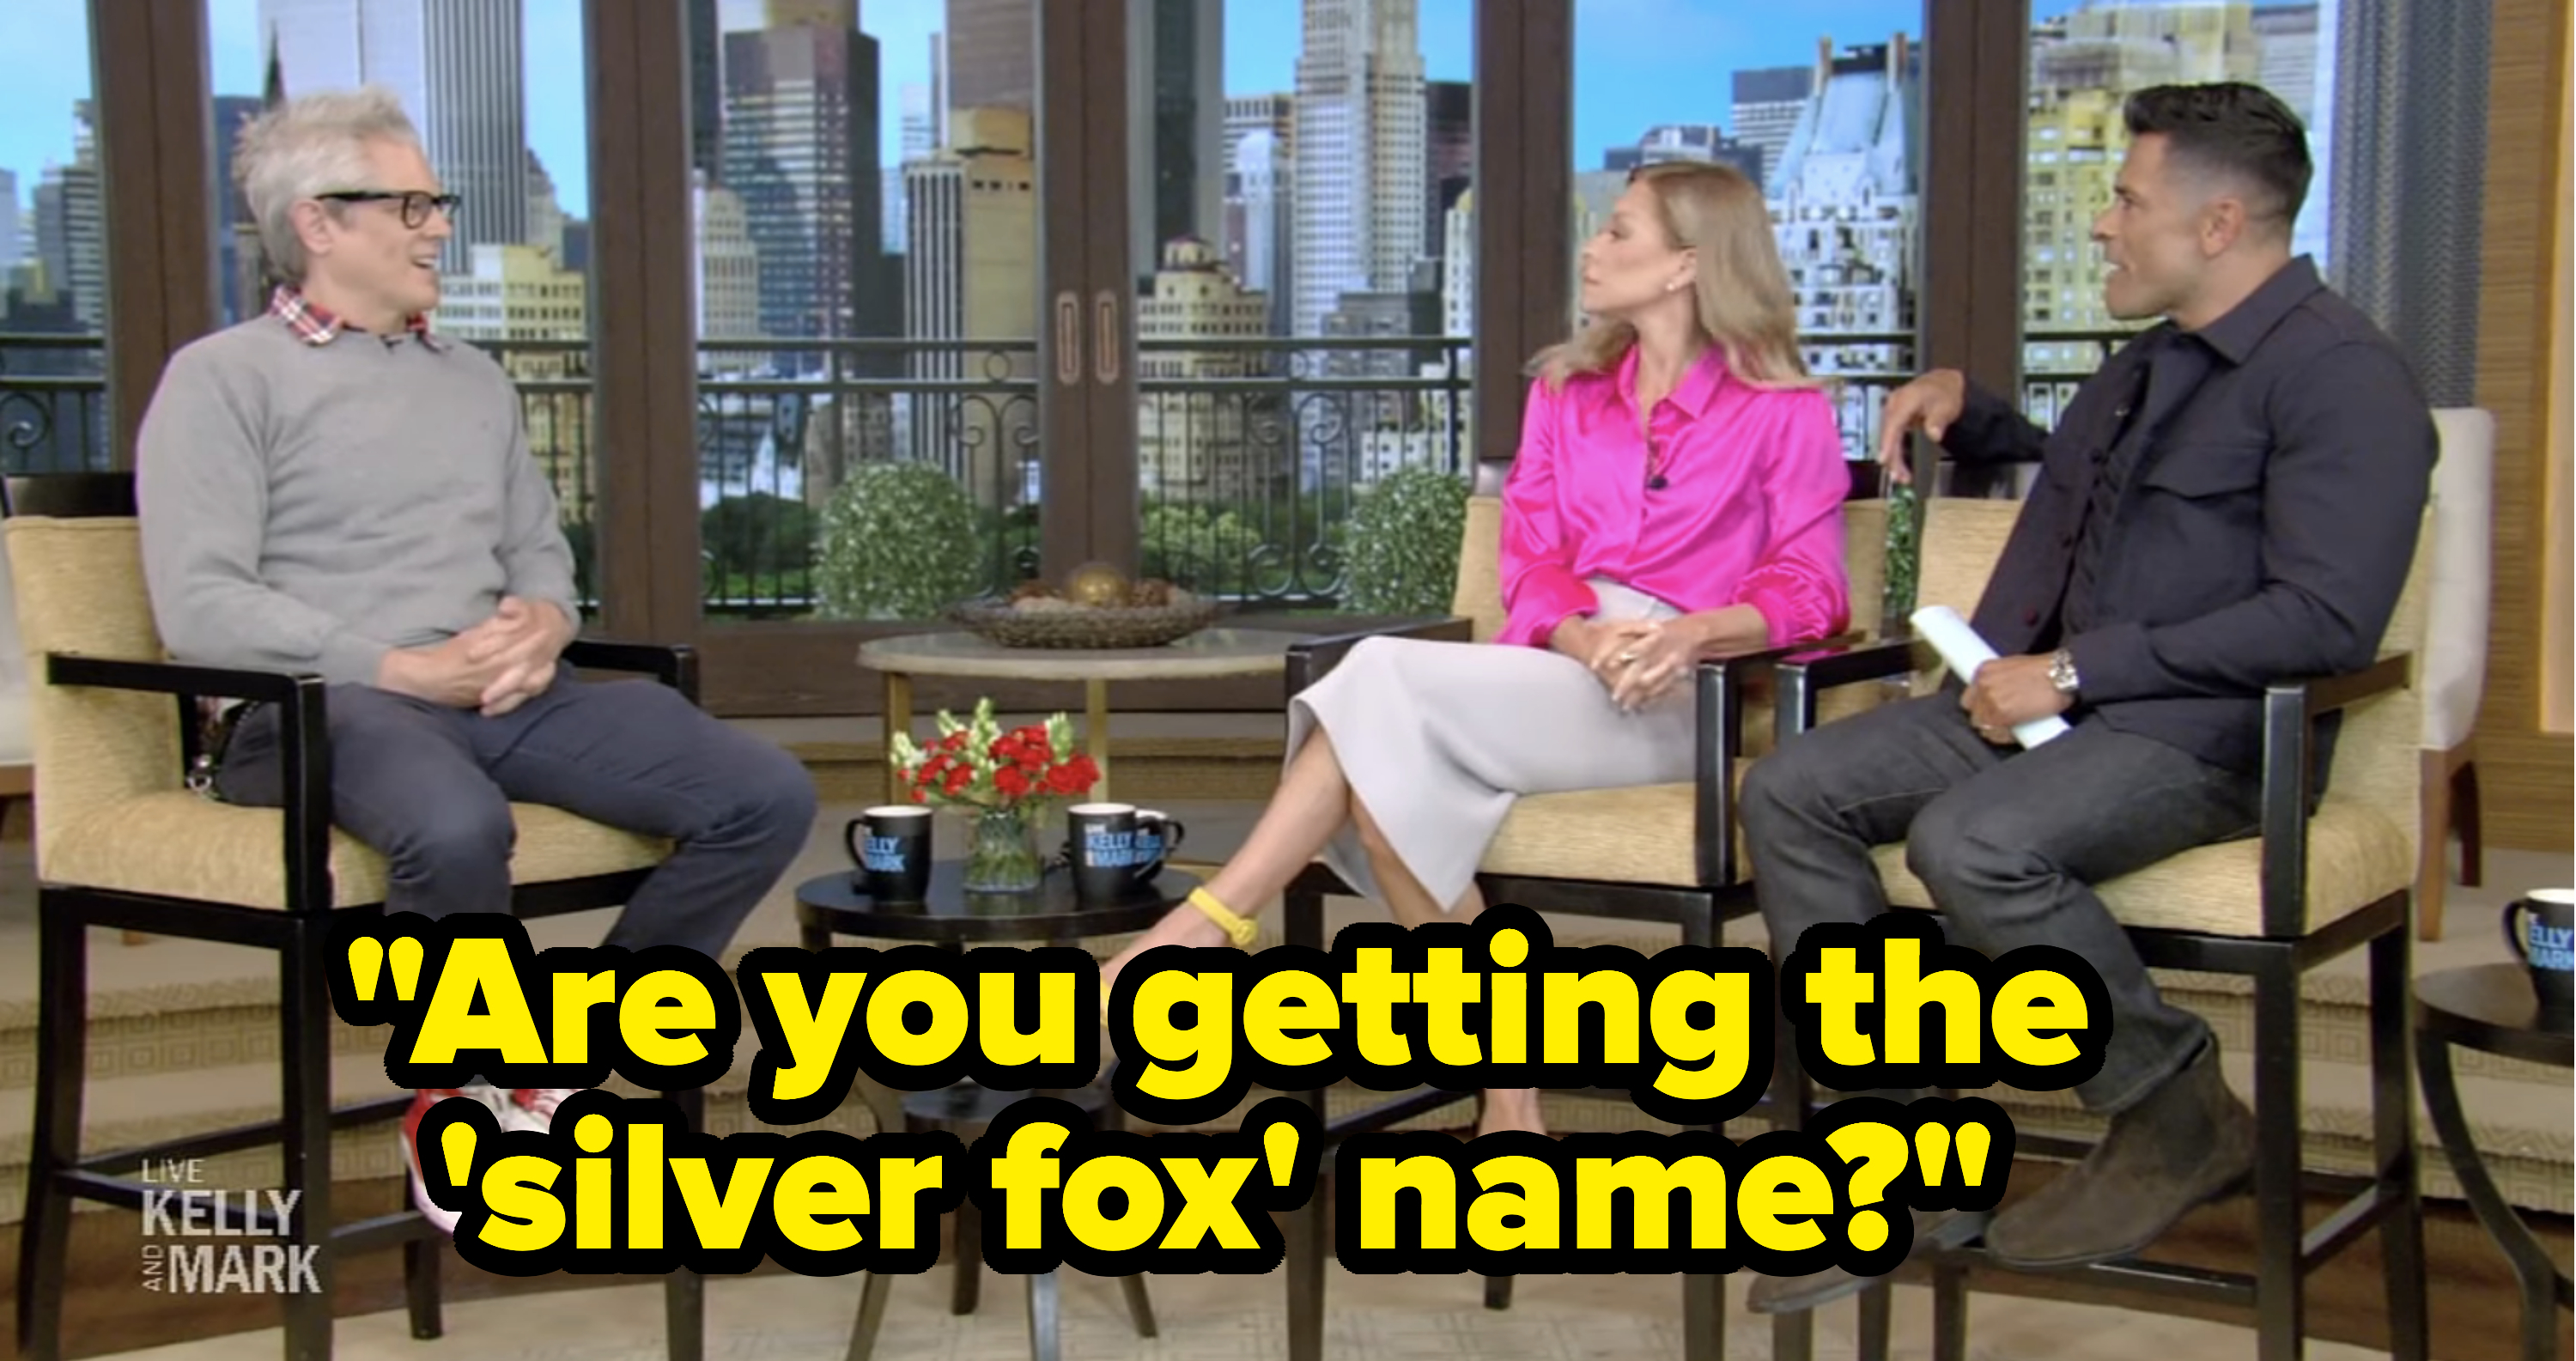 &quot;Are you getting the &#x27;silver fox&#x27; name?&quot;